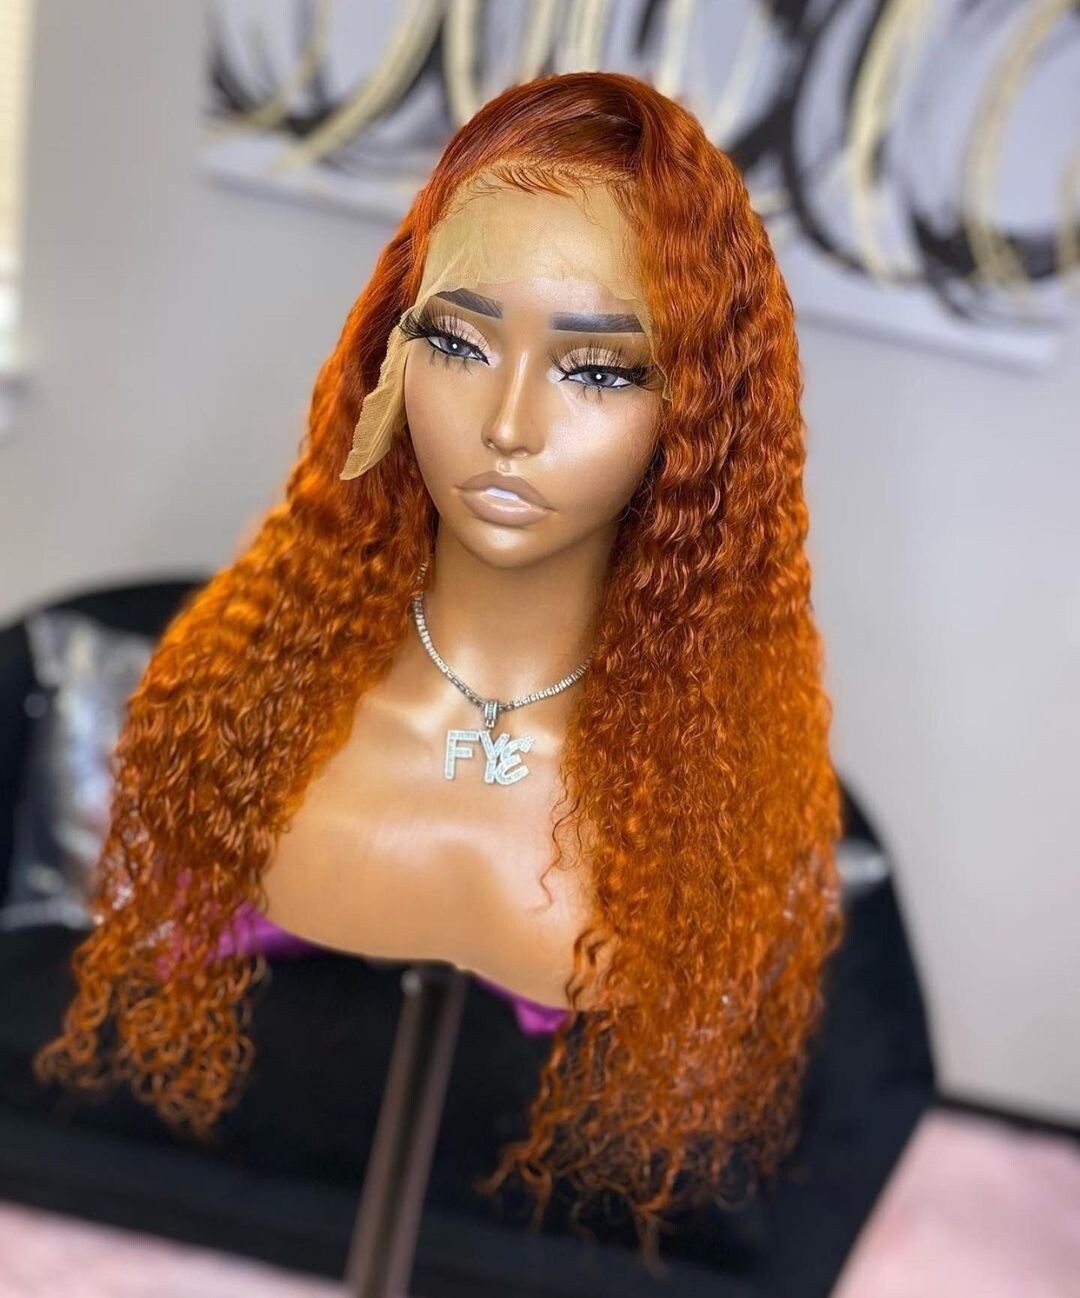 Brazilian Virgin Hair Ginger Orange Color Lace Front Wigs With Baby Hair Colorful Curly Human Hair Wigs for Black Women